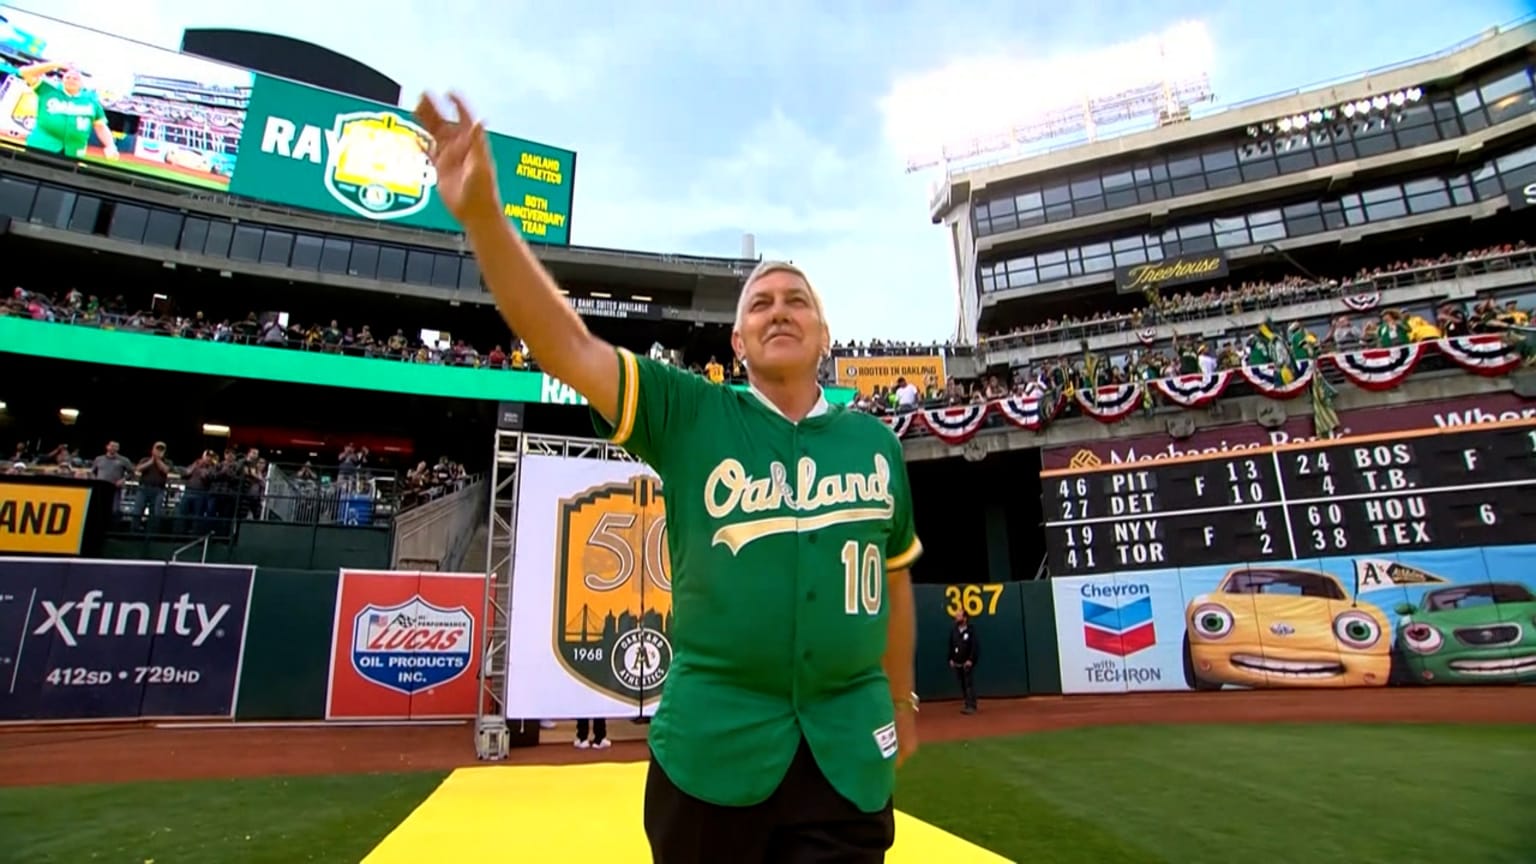 Oakland A's news: A's honour Ray Fosse at home opener - Athletics